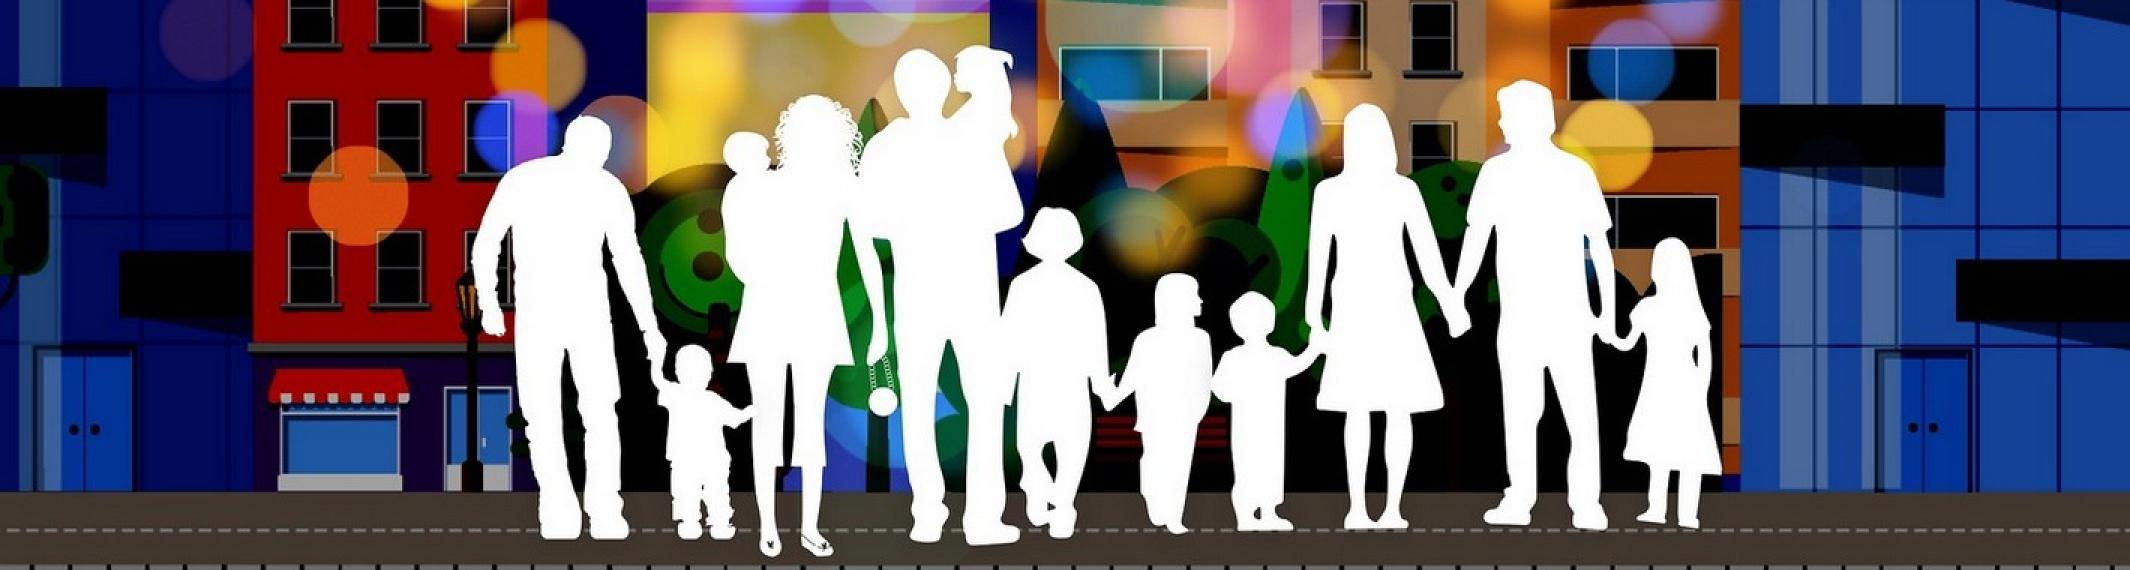 photo illustration of white silhouettes of people of various ages against a colorful streetscape background